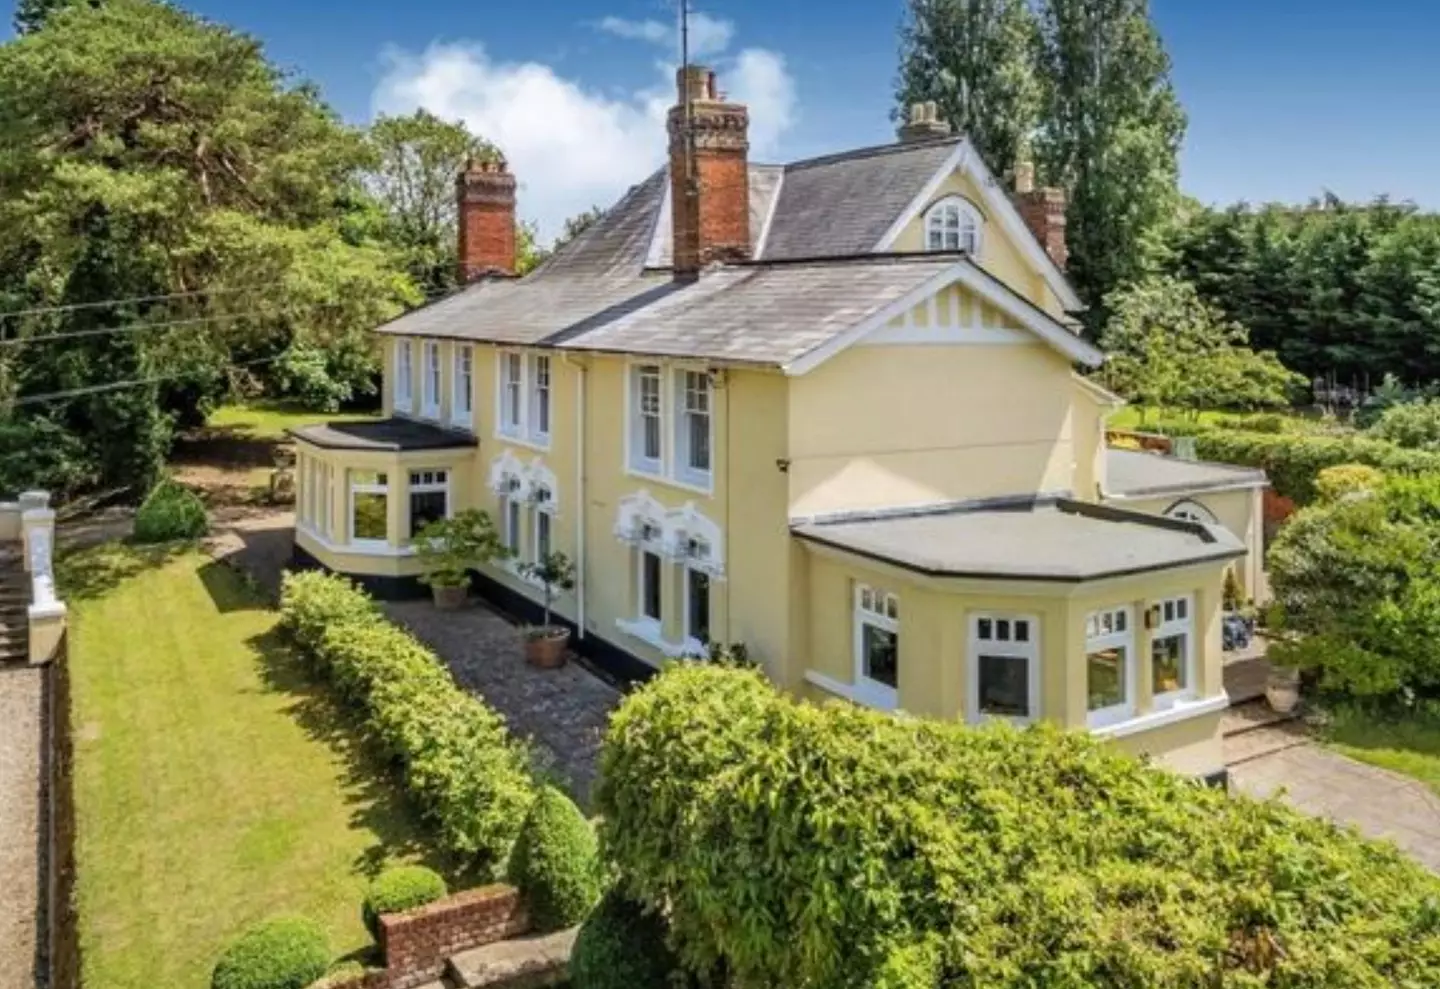 They bought the huge countryside mansion in 1967 for £11,000.